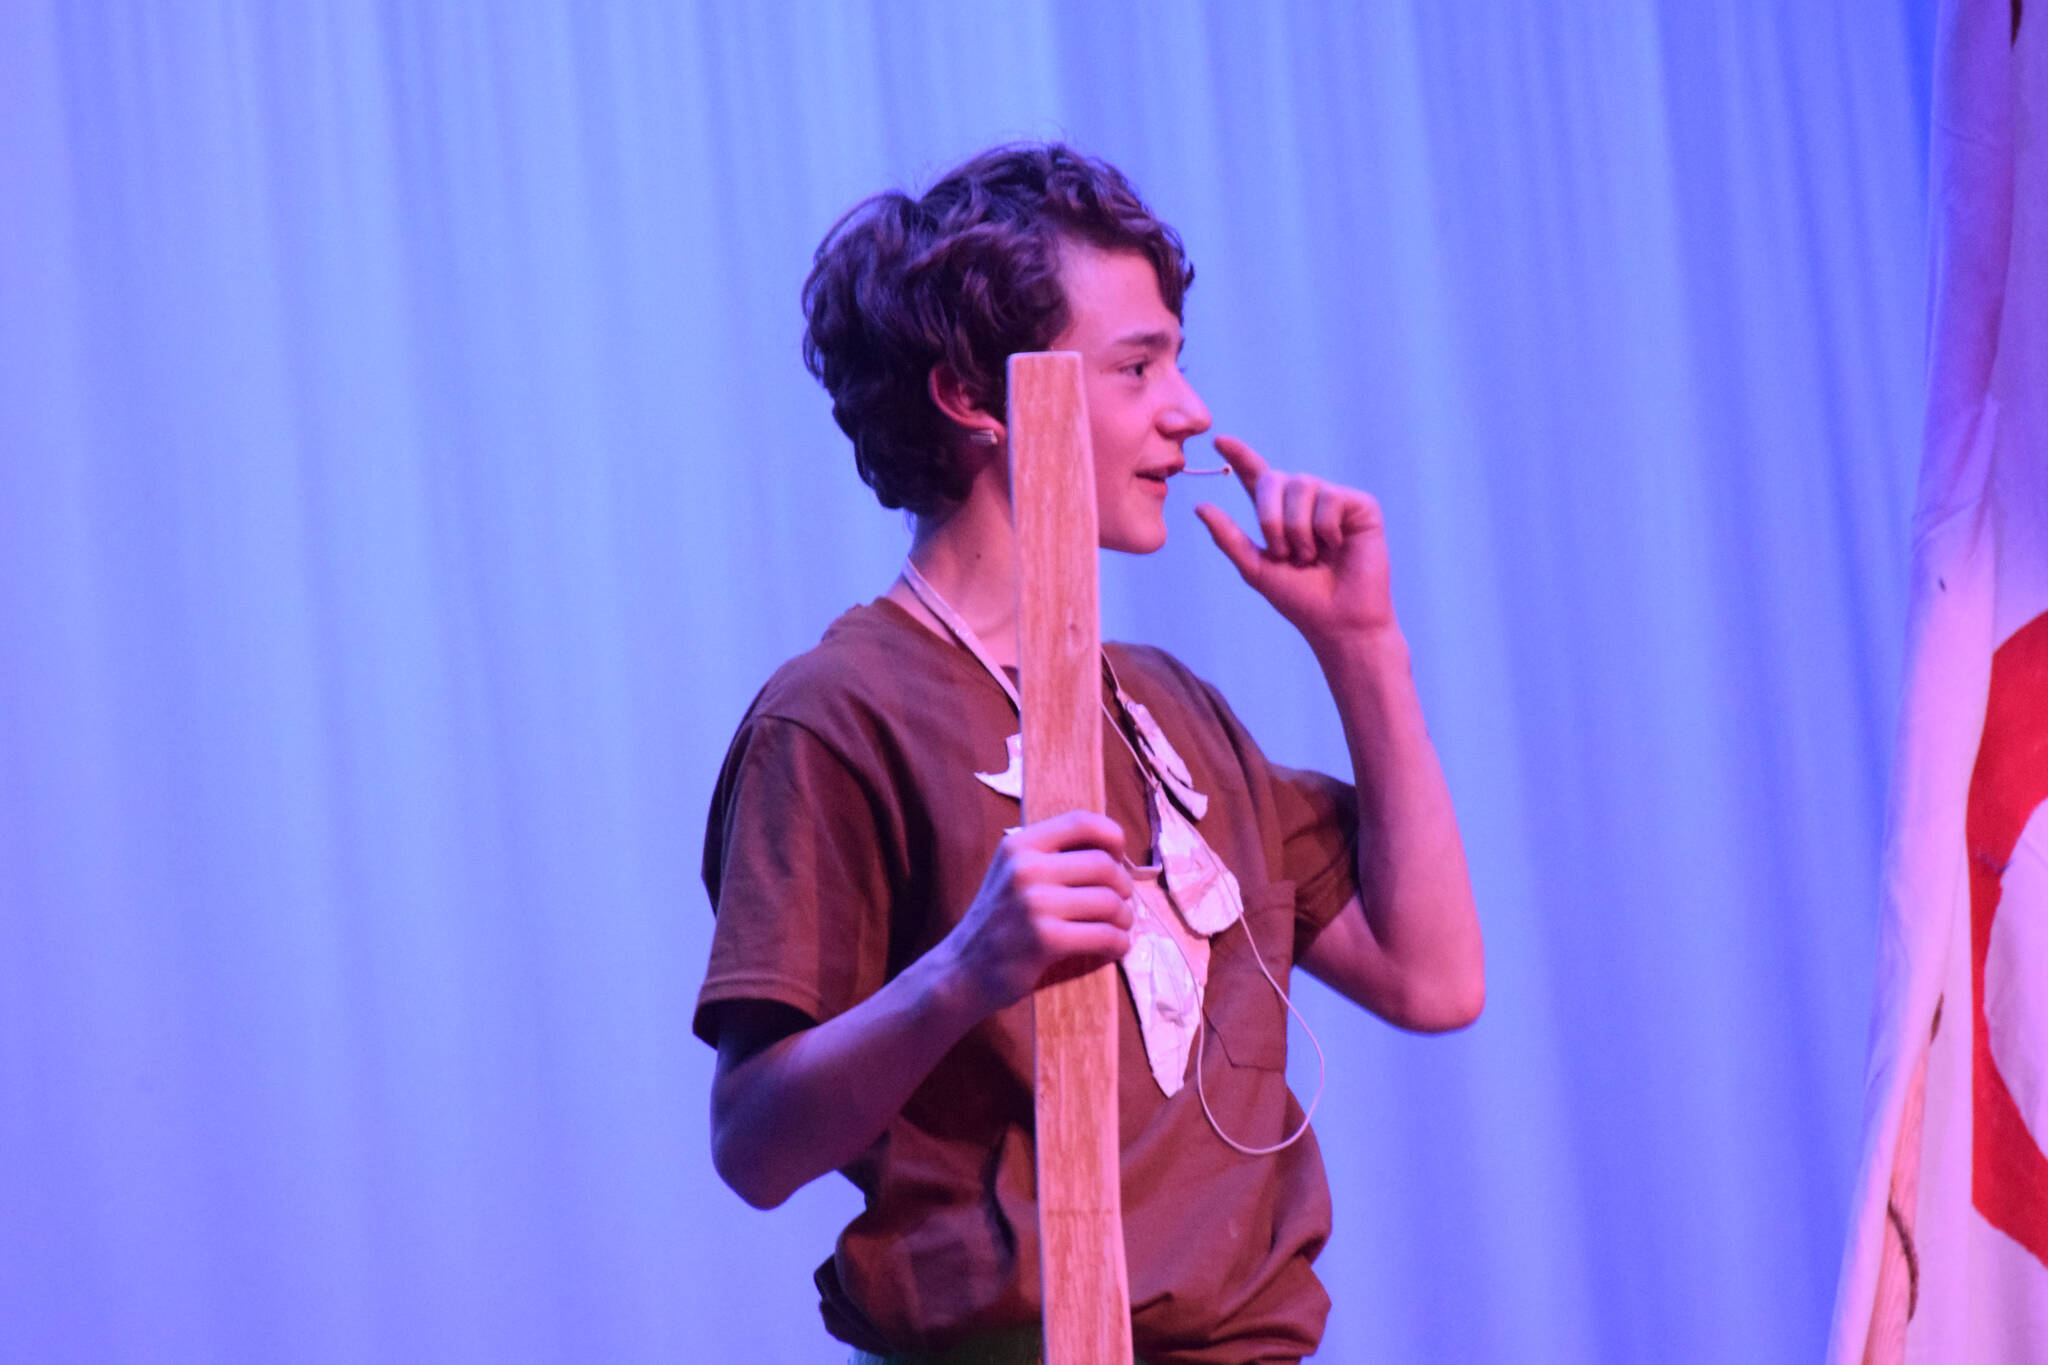 Cooper Tallent-Darling performs a scene from “Moana” during a dress rehearsal at the Renee C. Henderson Auditorium in Kenai, Alaska, on Wednesday, April 27, 2022. (Camille Botello/Peninsula Clarion)